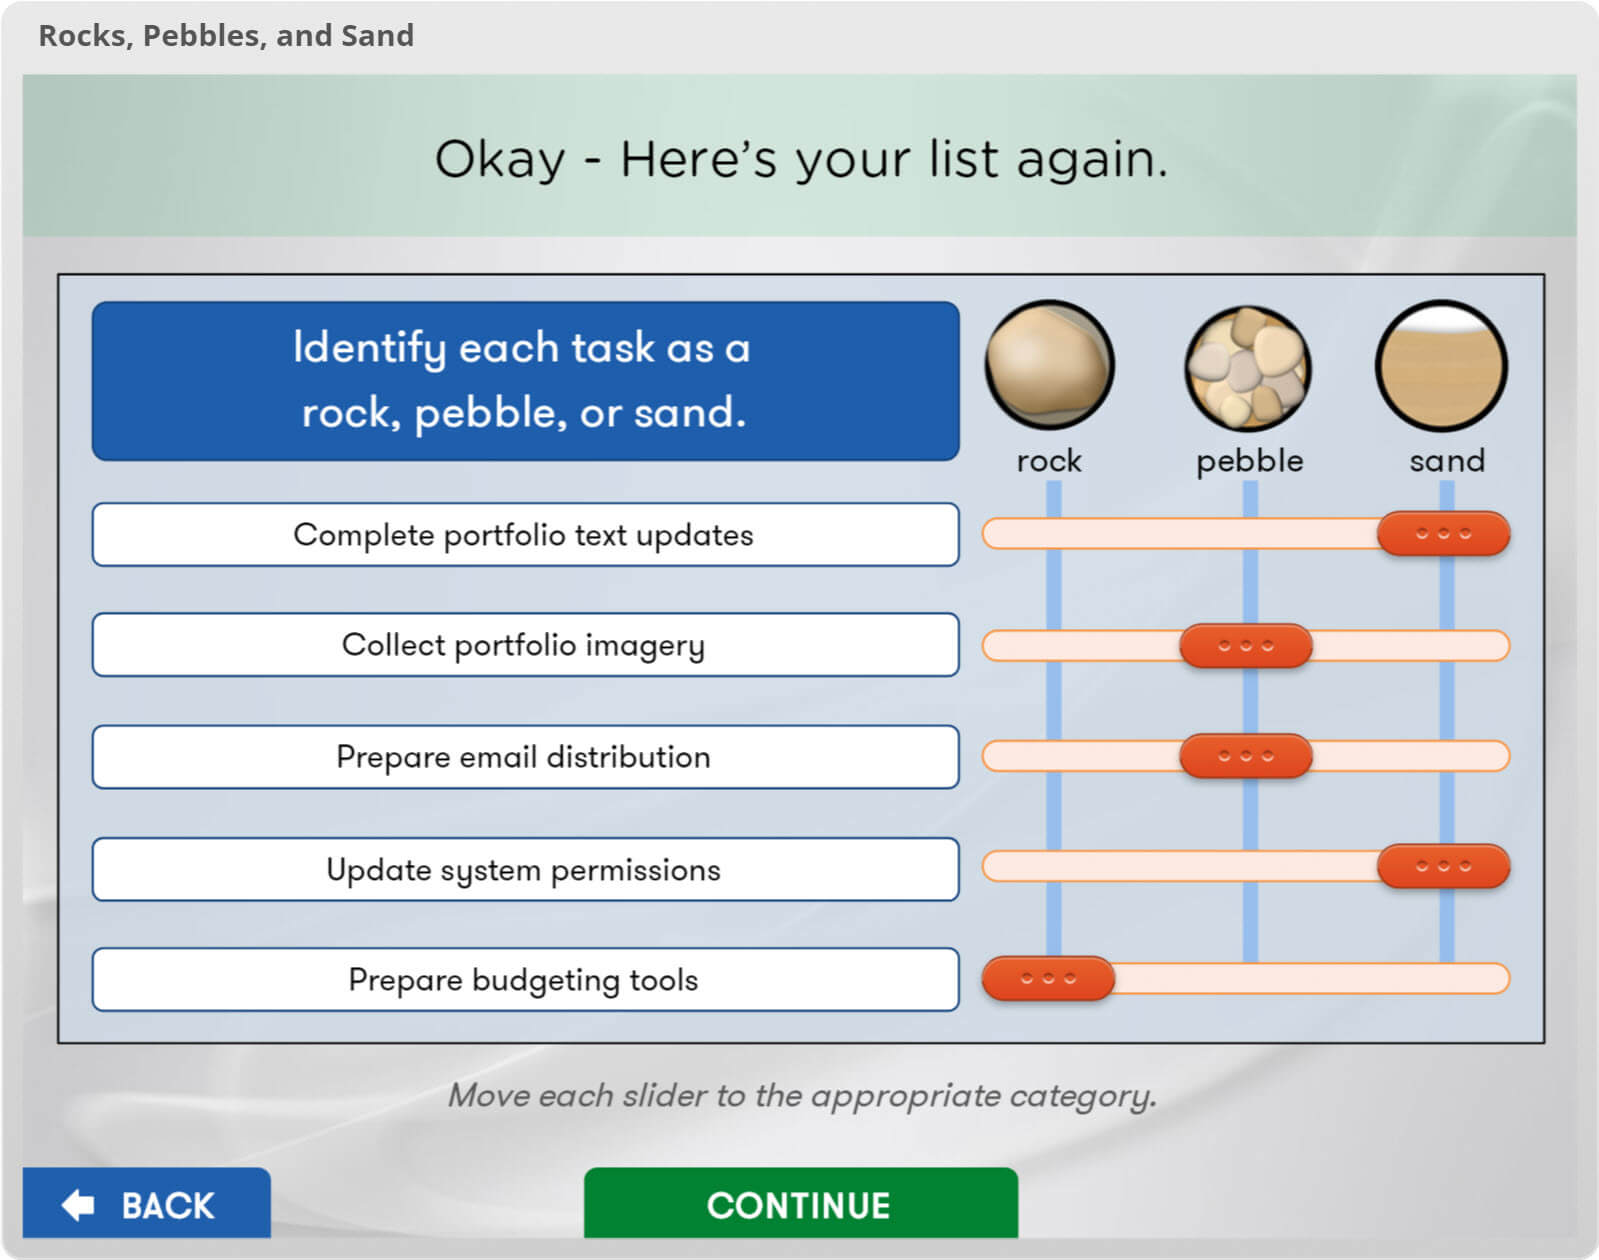 Sample screen capture from the course with the title, "Rocks, Pebbles, and Sand." There is a list of five tasks and the learner is asked to identify each as a rock, pebble, or sand. 